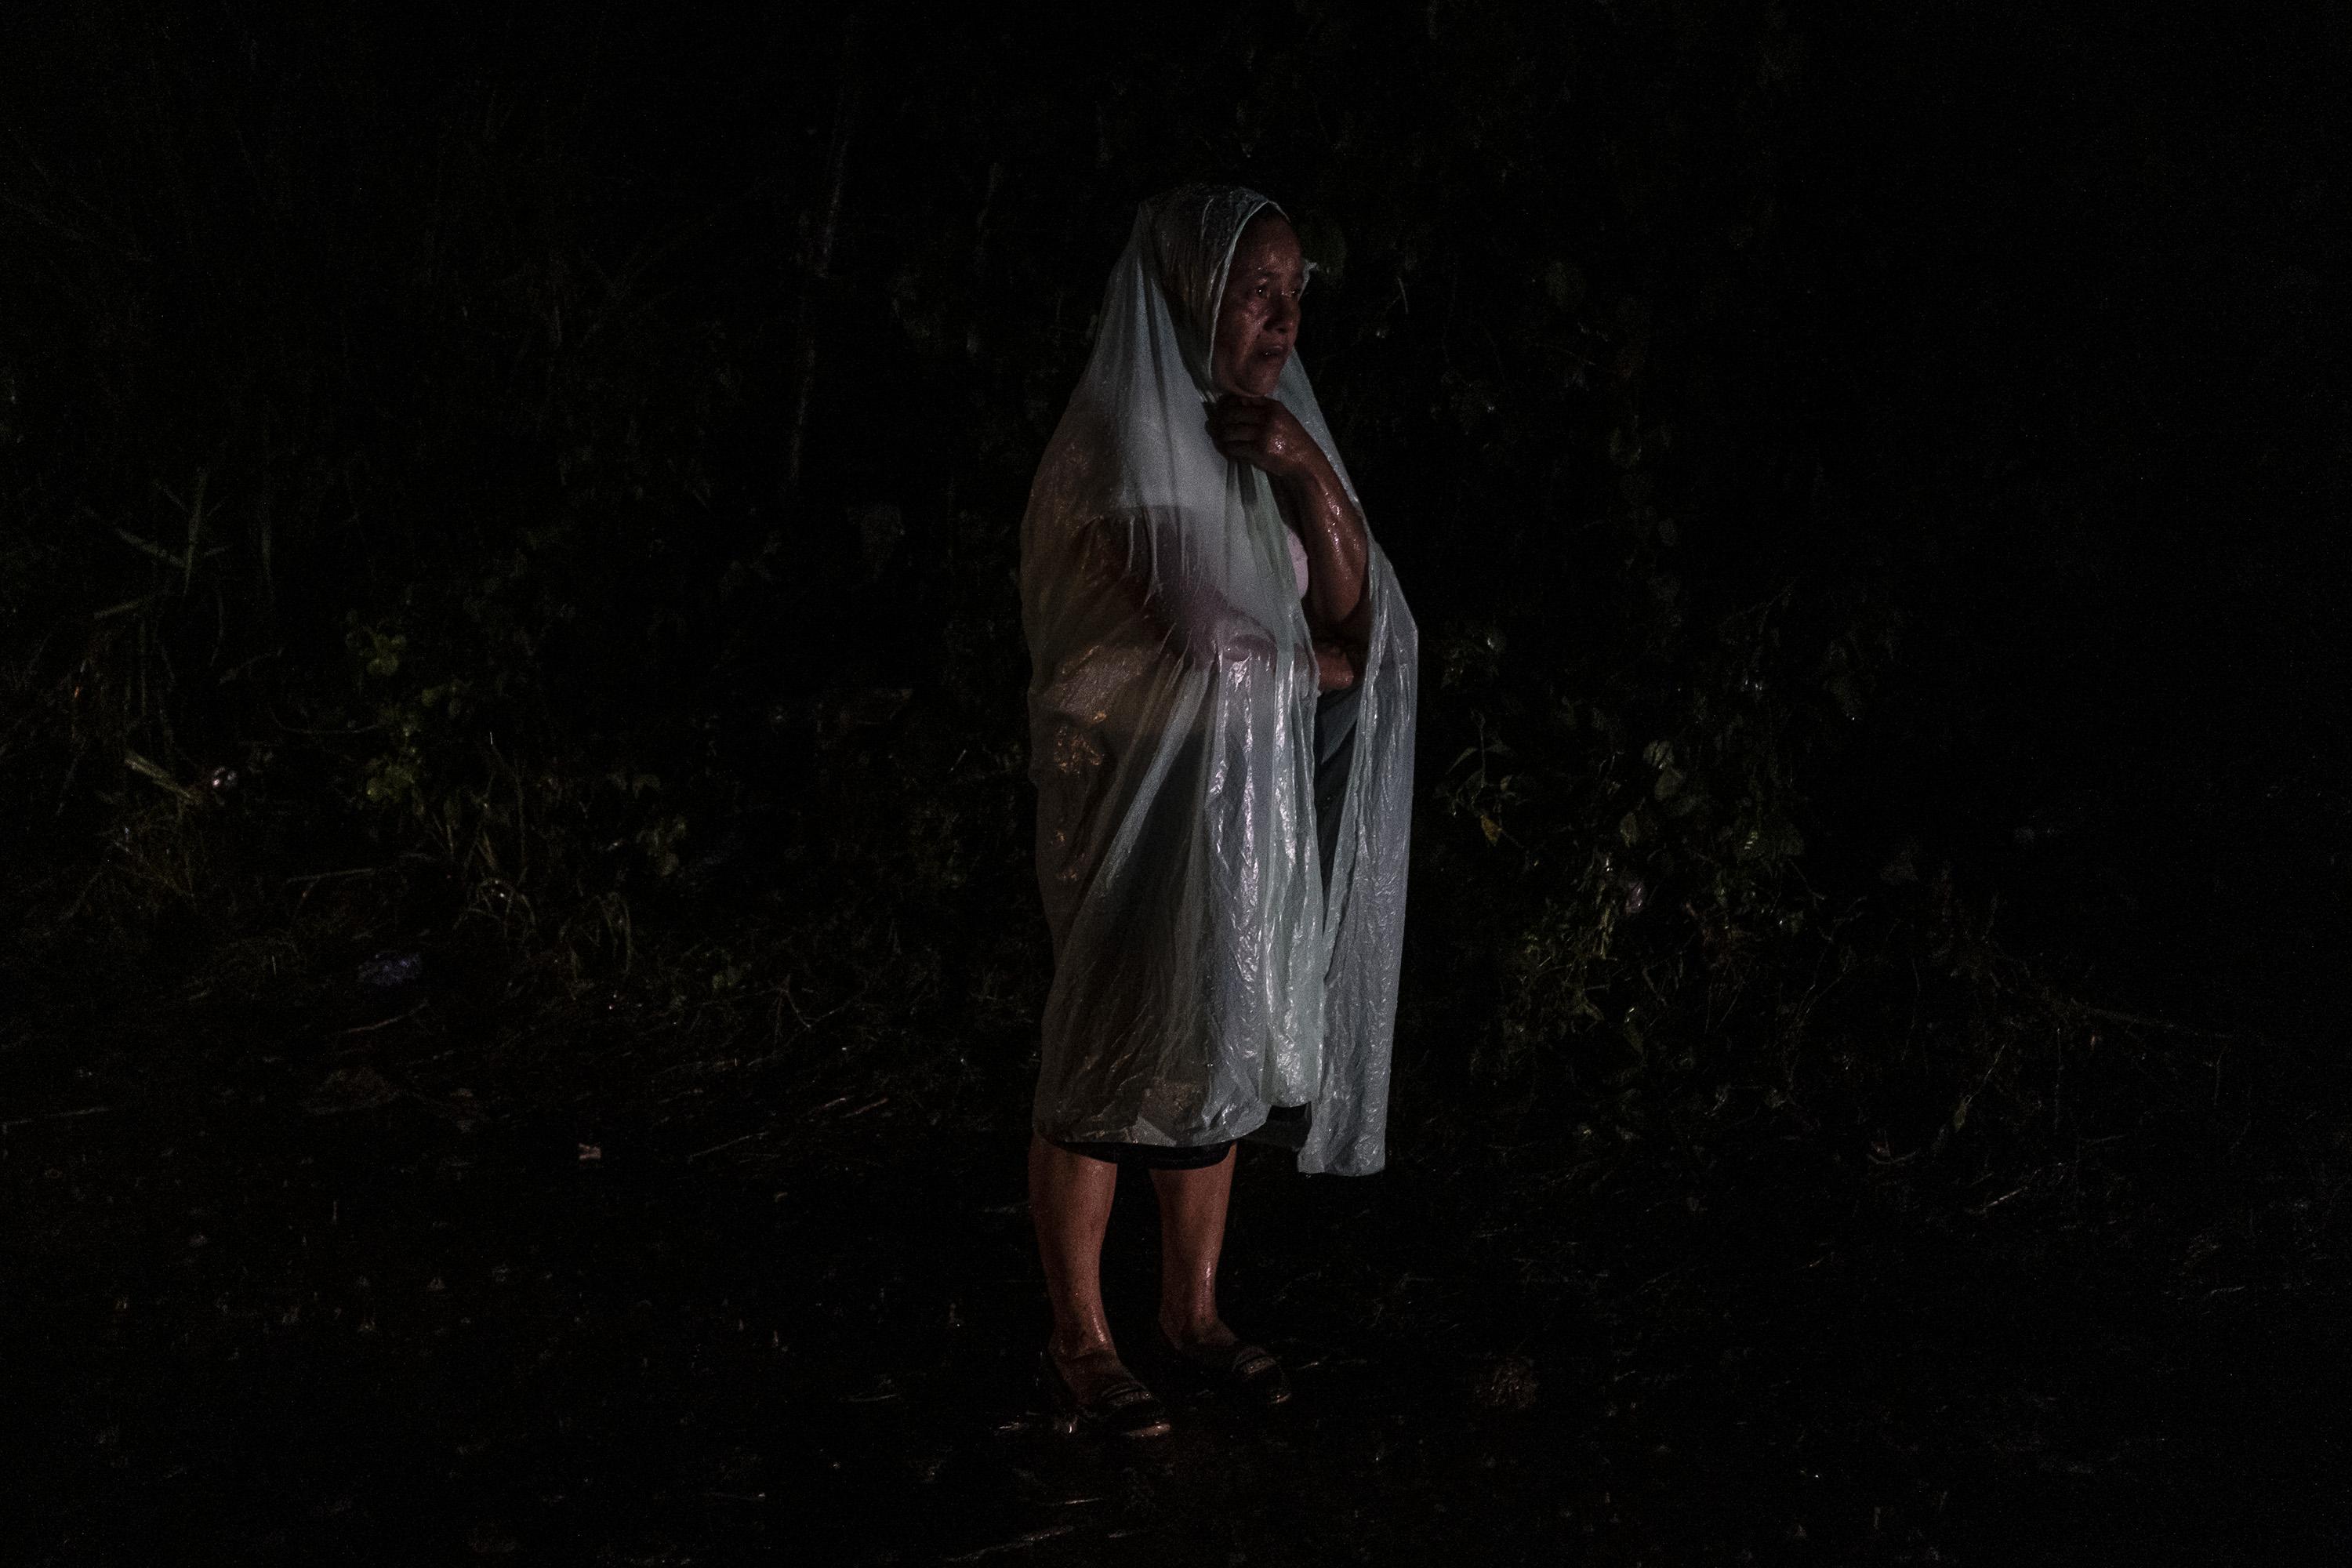 By 7:30 at night on April 27, the four men released from Izalco had already been reunited with their families. Noelys González continued waiting in the storm, along the edge of the dirt road leading to the prison facility, in the hopes of catching a glimpse of her brother, a cab driver arrested on April 7 in Juayúa, Sonsonate. She had no idea how she would return home that night. “I don’t know if I’ll leave here on foot or sleep here in the street. I was hoping my brother would be released today, and I’ll stay here. Maybe he’ll show. Every day dozens of women trod down this path with the same hope. Most of them end the day frustrated and exhausted from the heat and seasonal rain. Photo: Carlos Barrera/El Faro